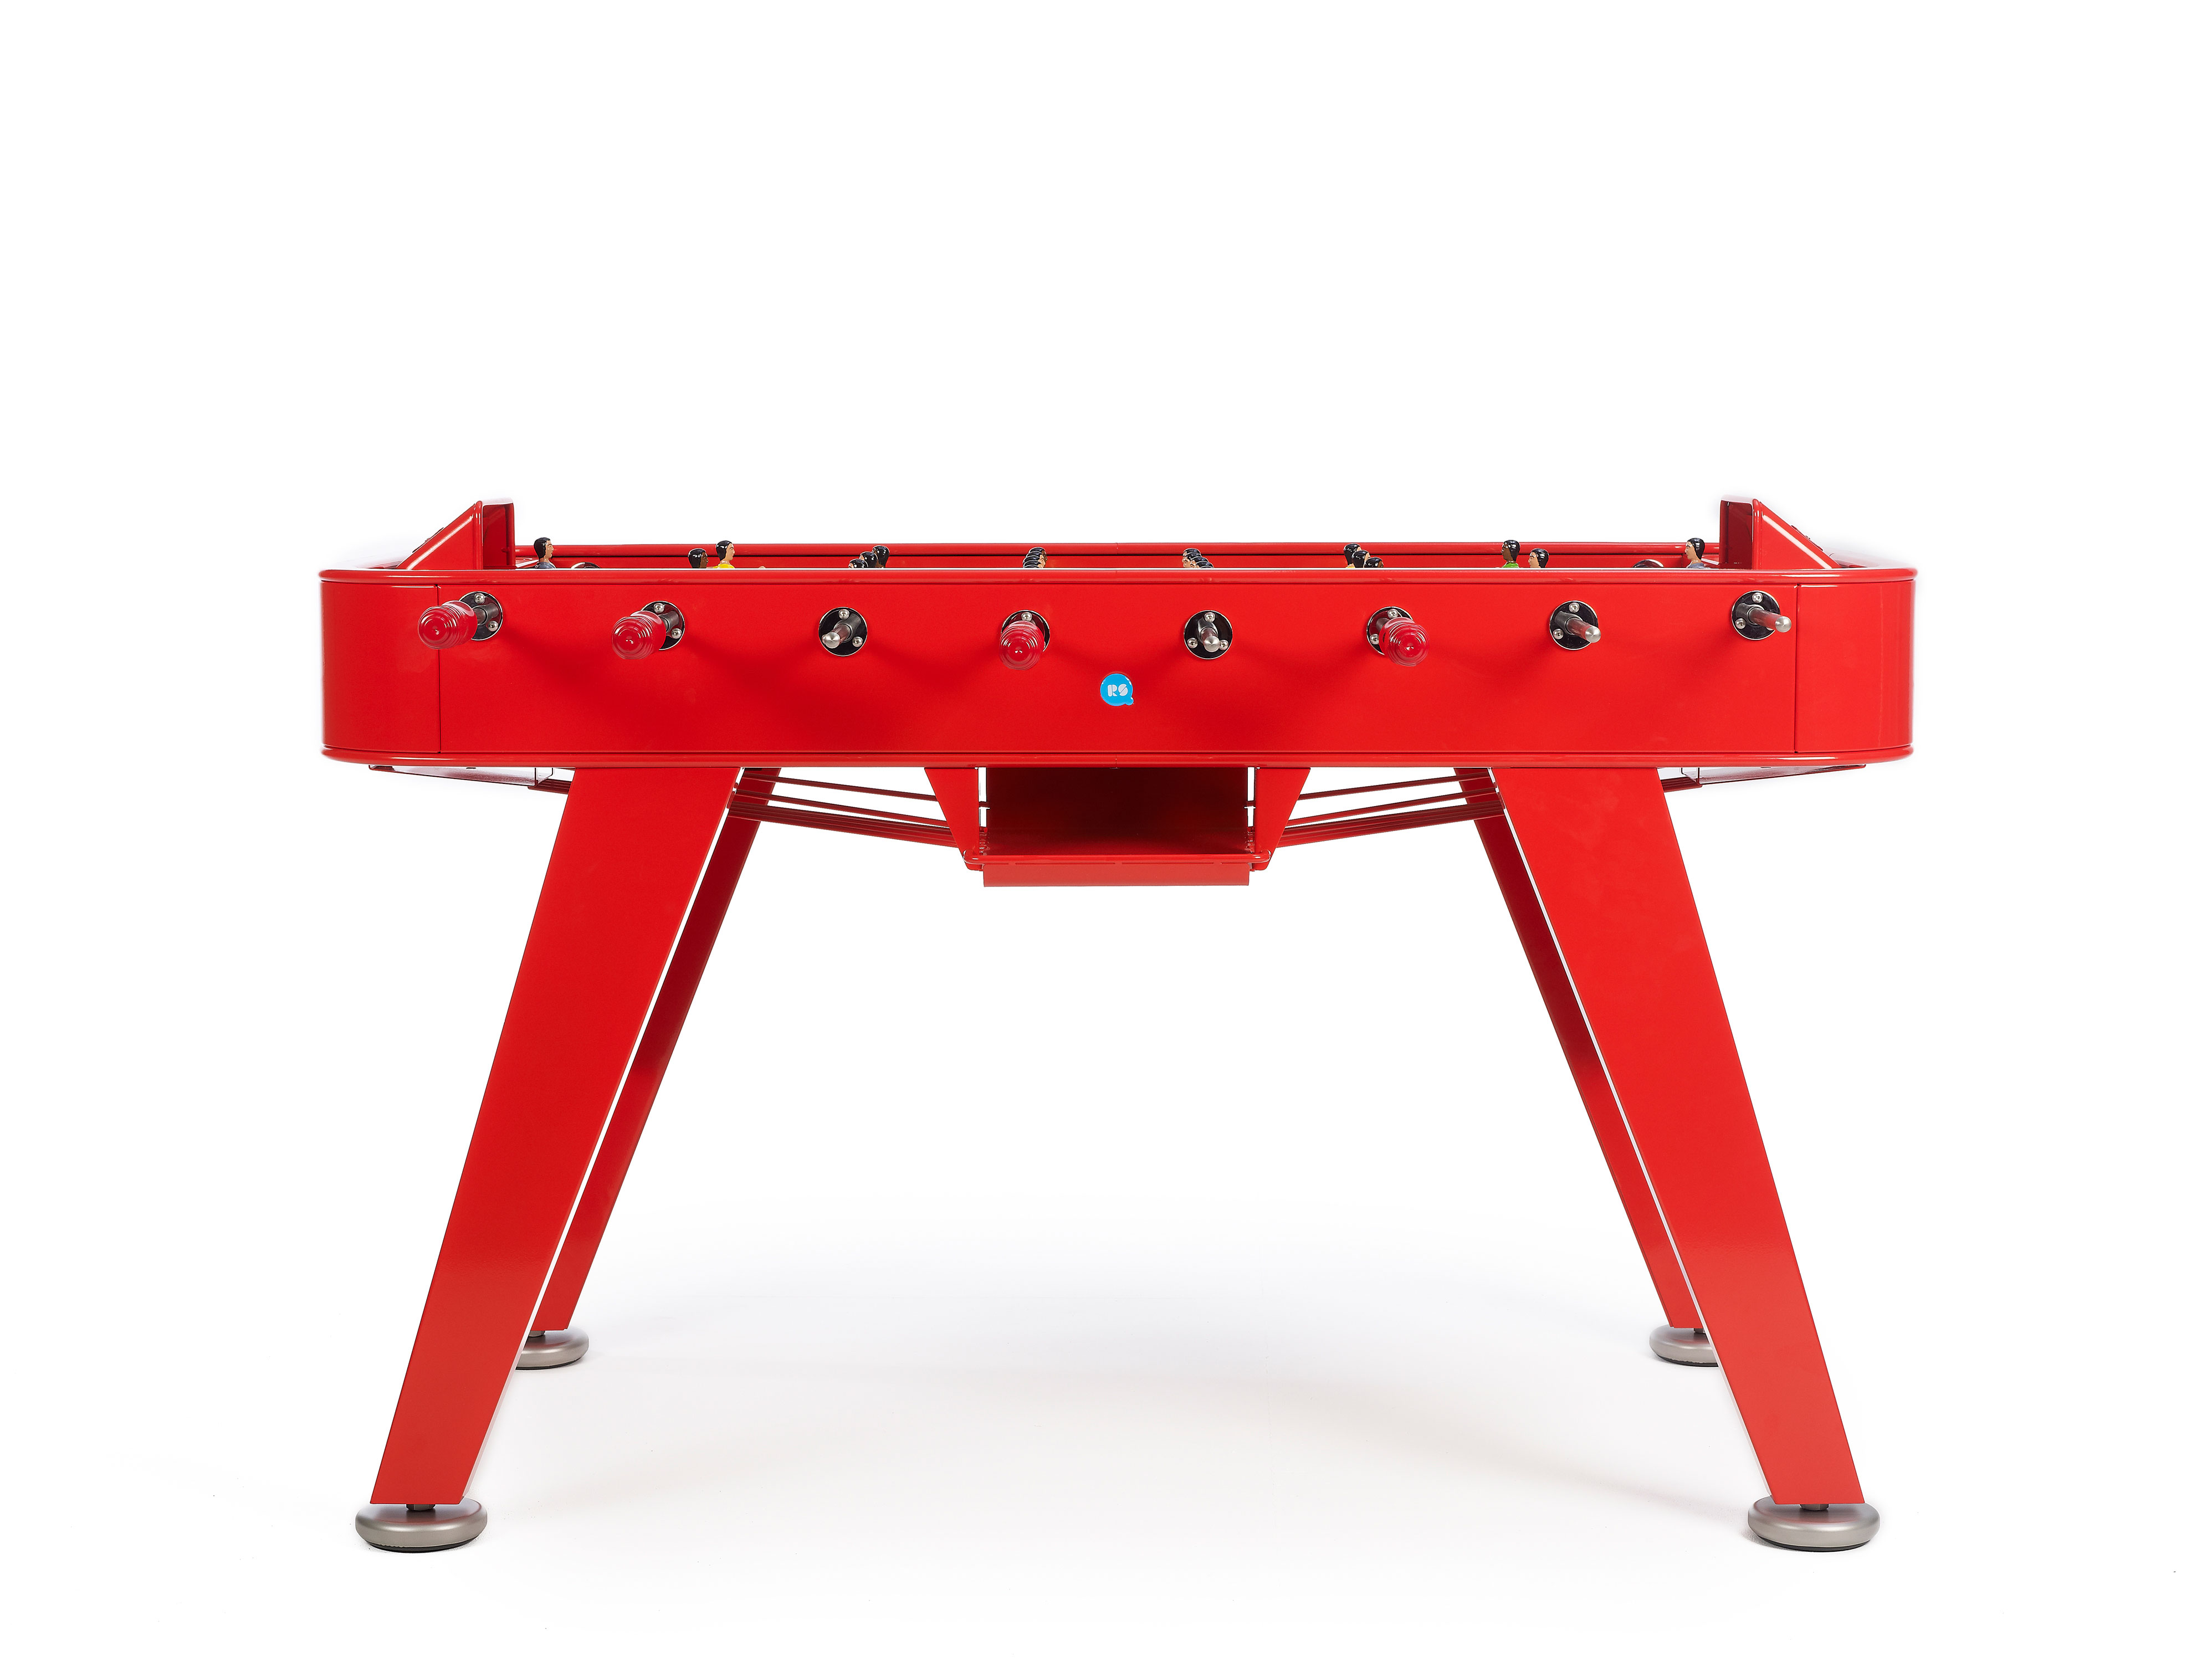 Football table "Profi" - design RS#2 from RS Barcelona (outdoor & indoor)